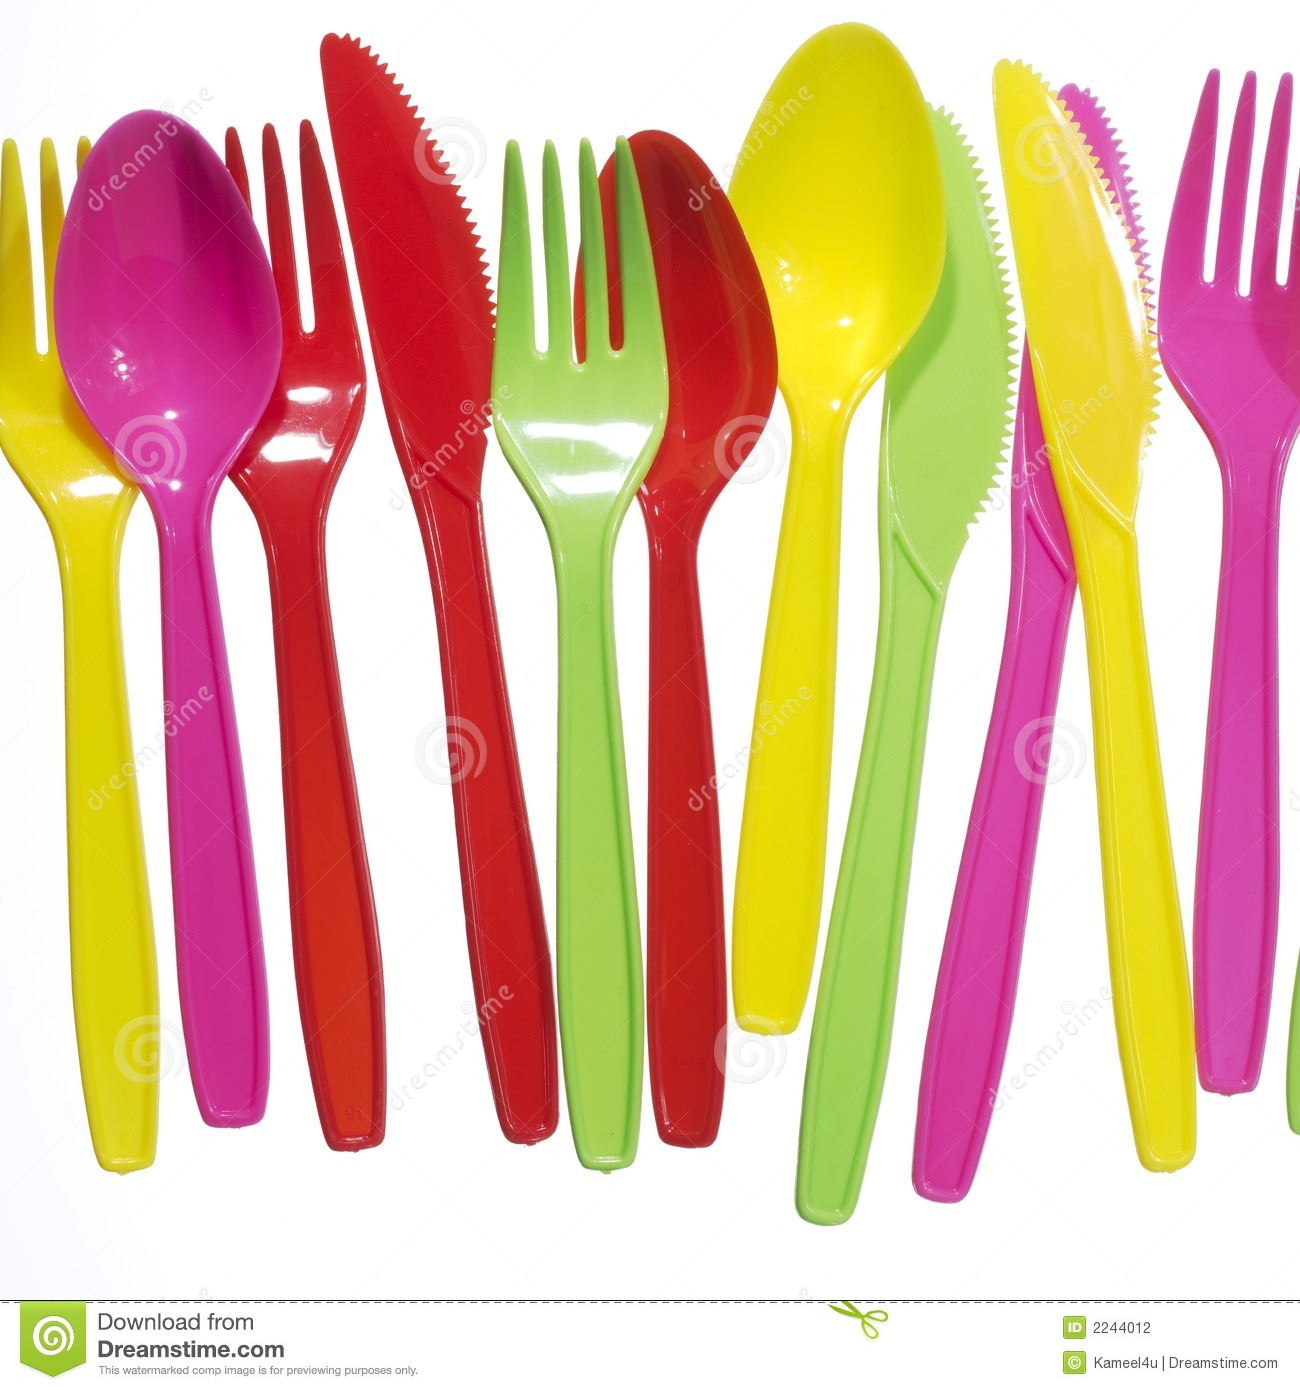 Plastic forks and spoons clipart.